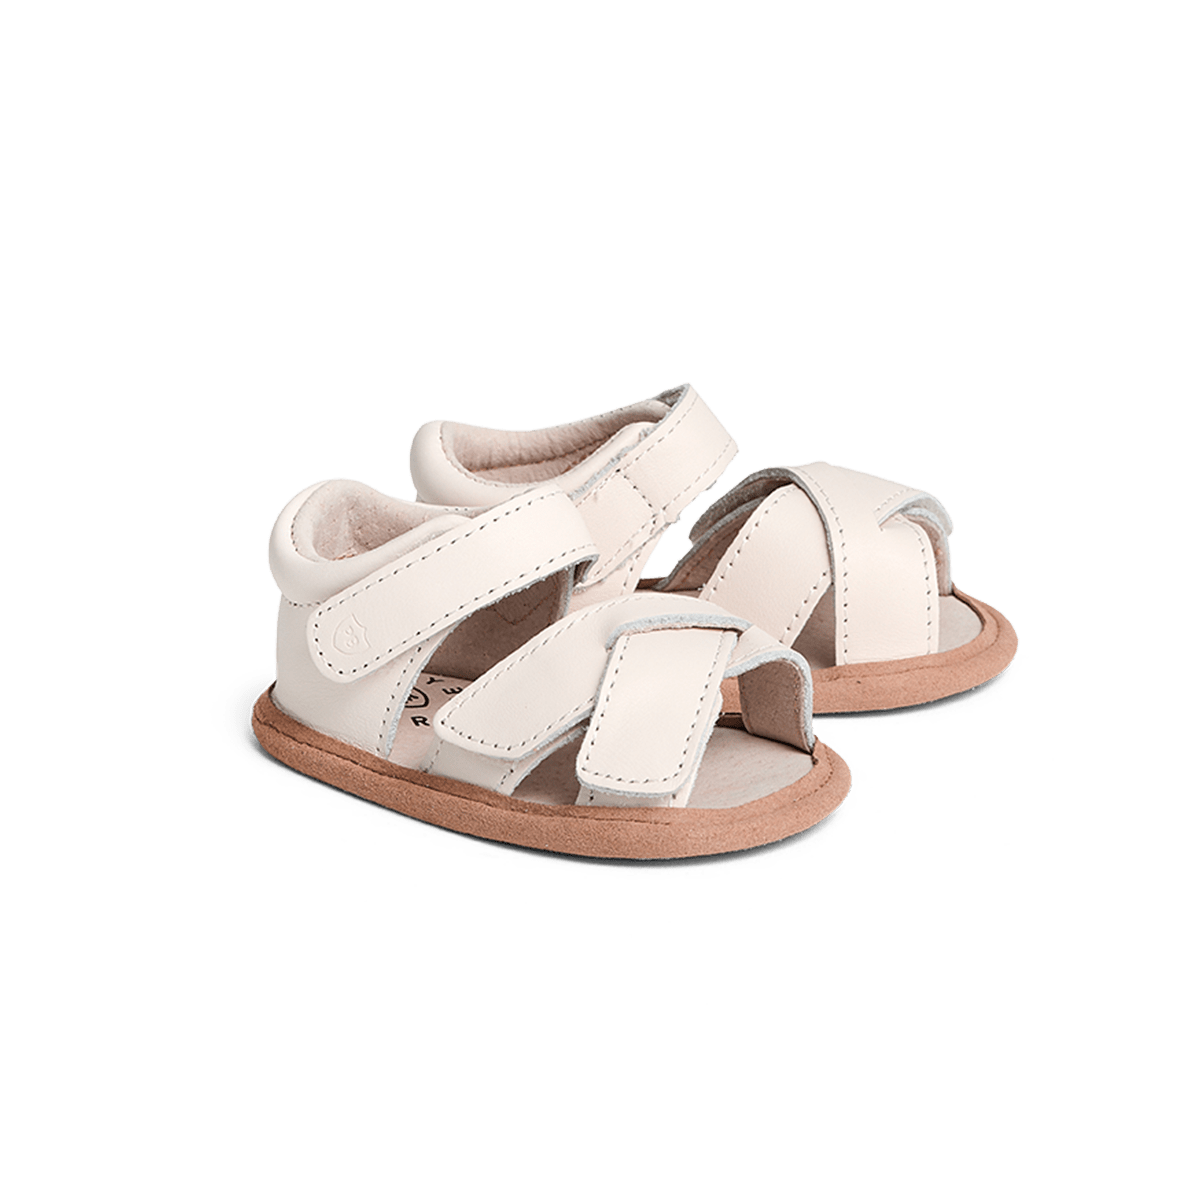 Pretty Brave Baby Shoes Criss-Cross Sandal in Stone